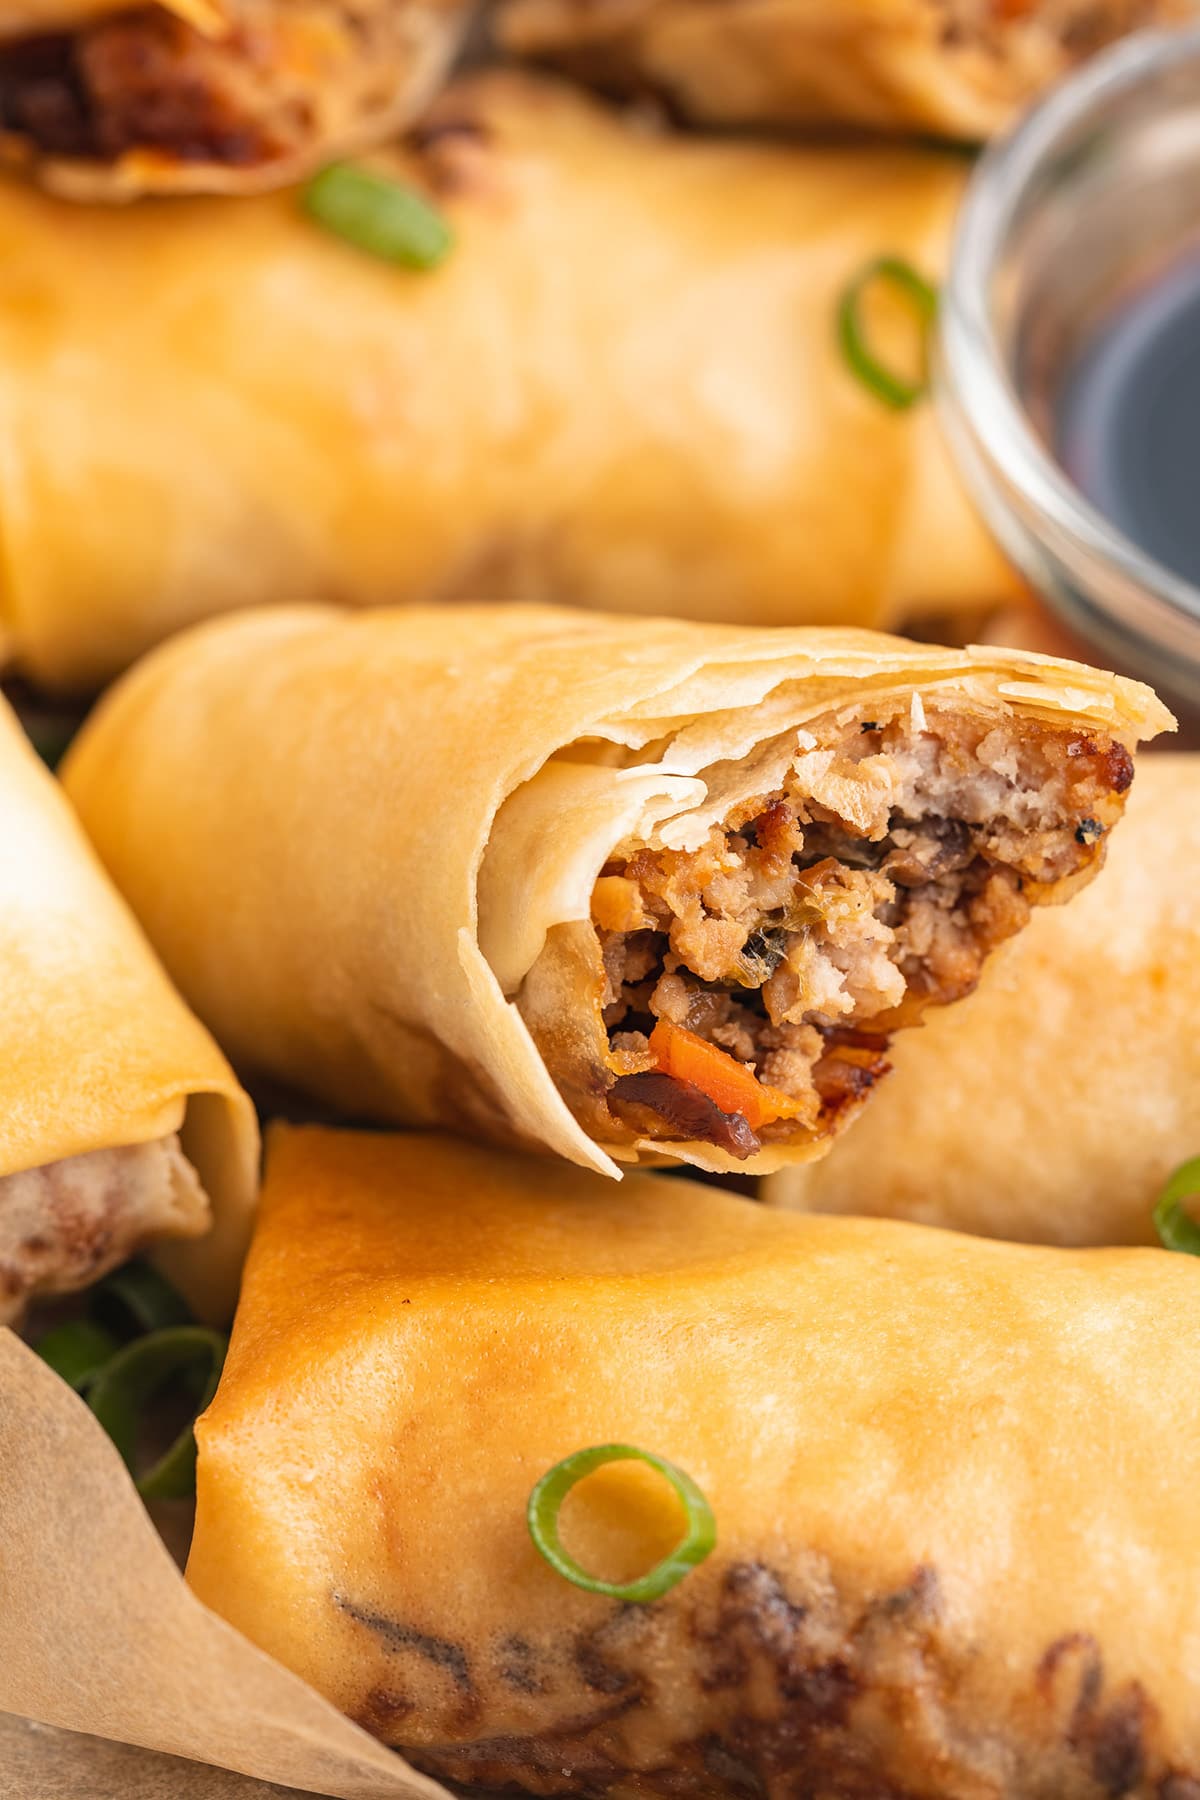 Close-up of a homemade air fryer egg roll, with one bite taken out of the end closest to the camera, showing the pork and veggie filling.